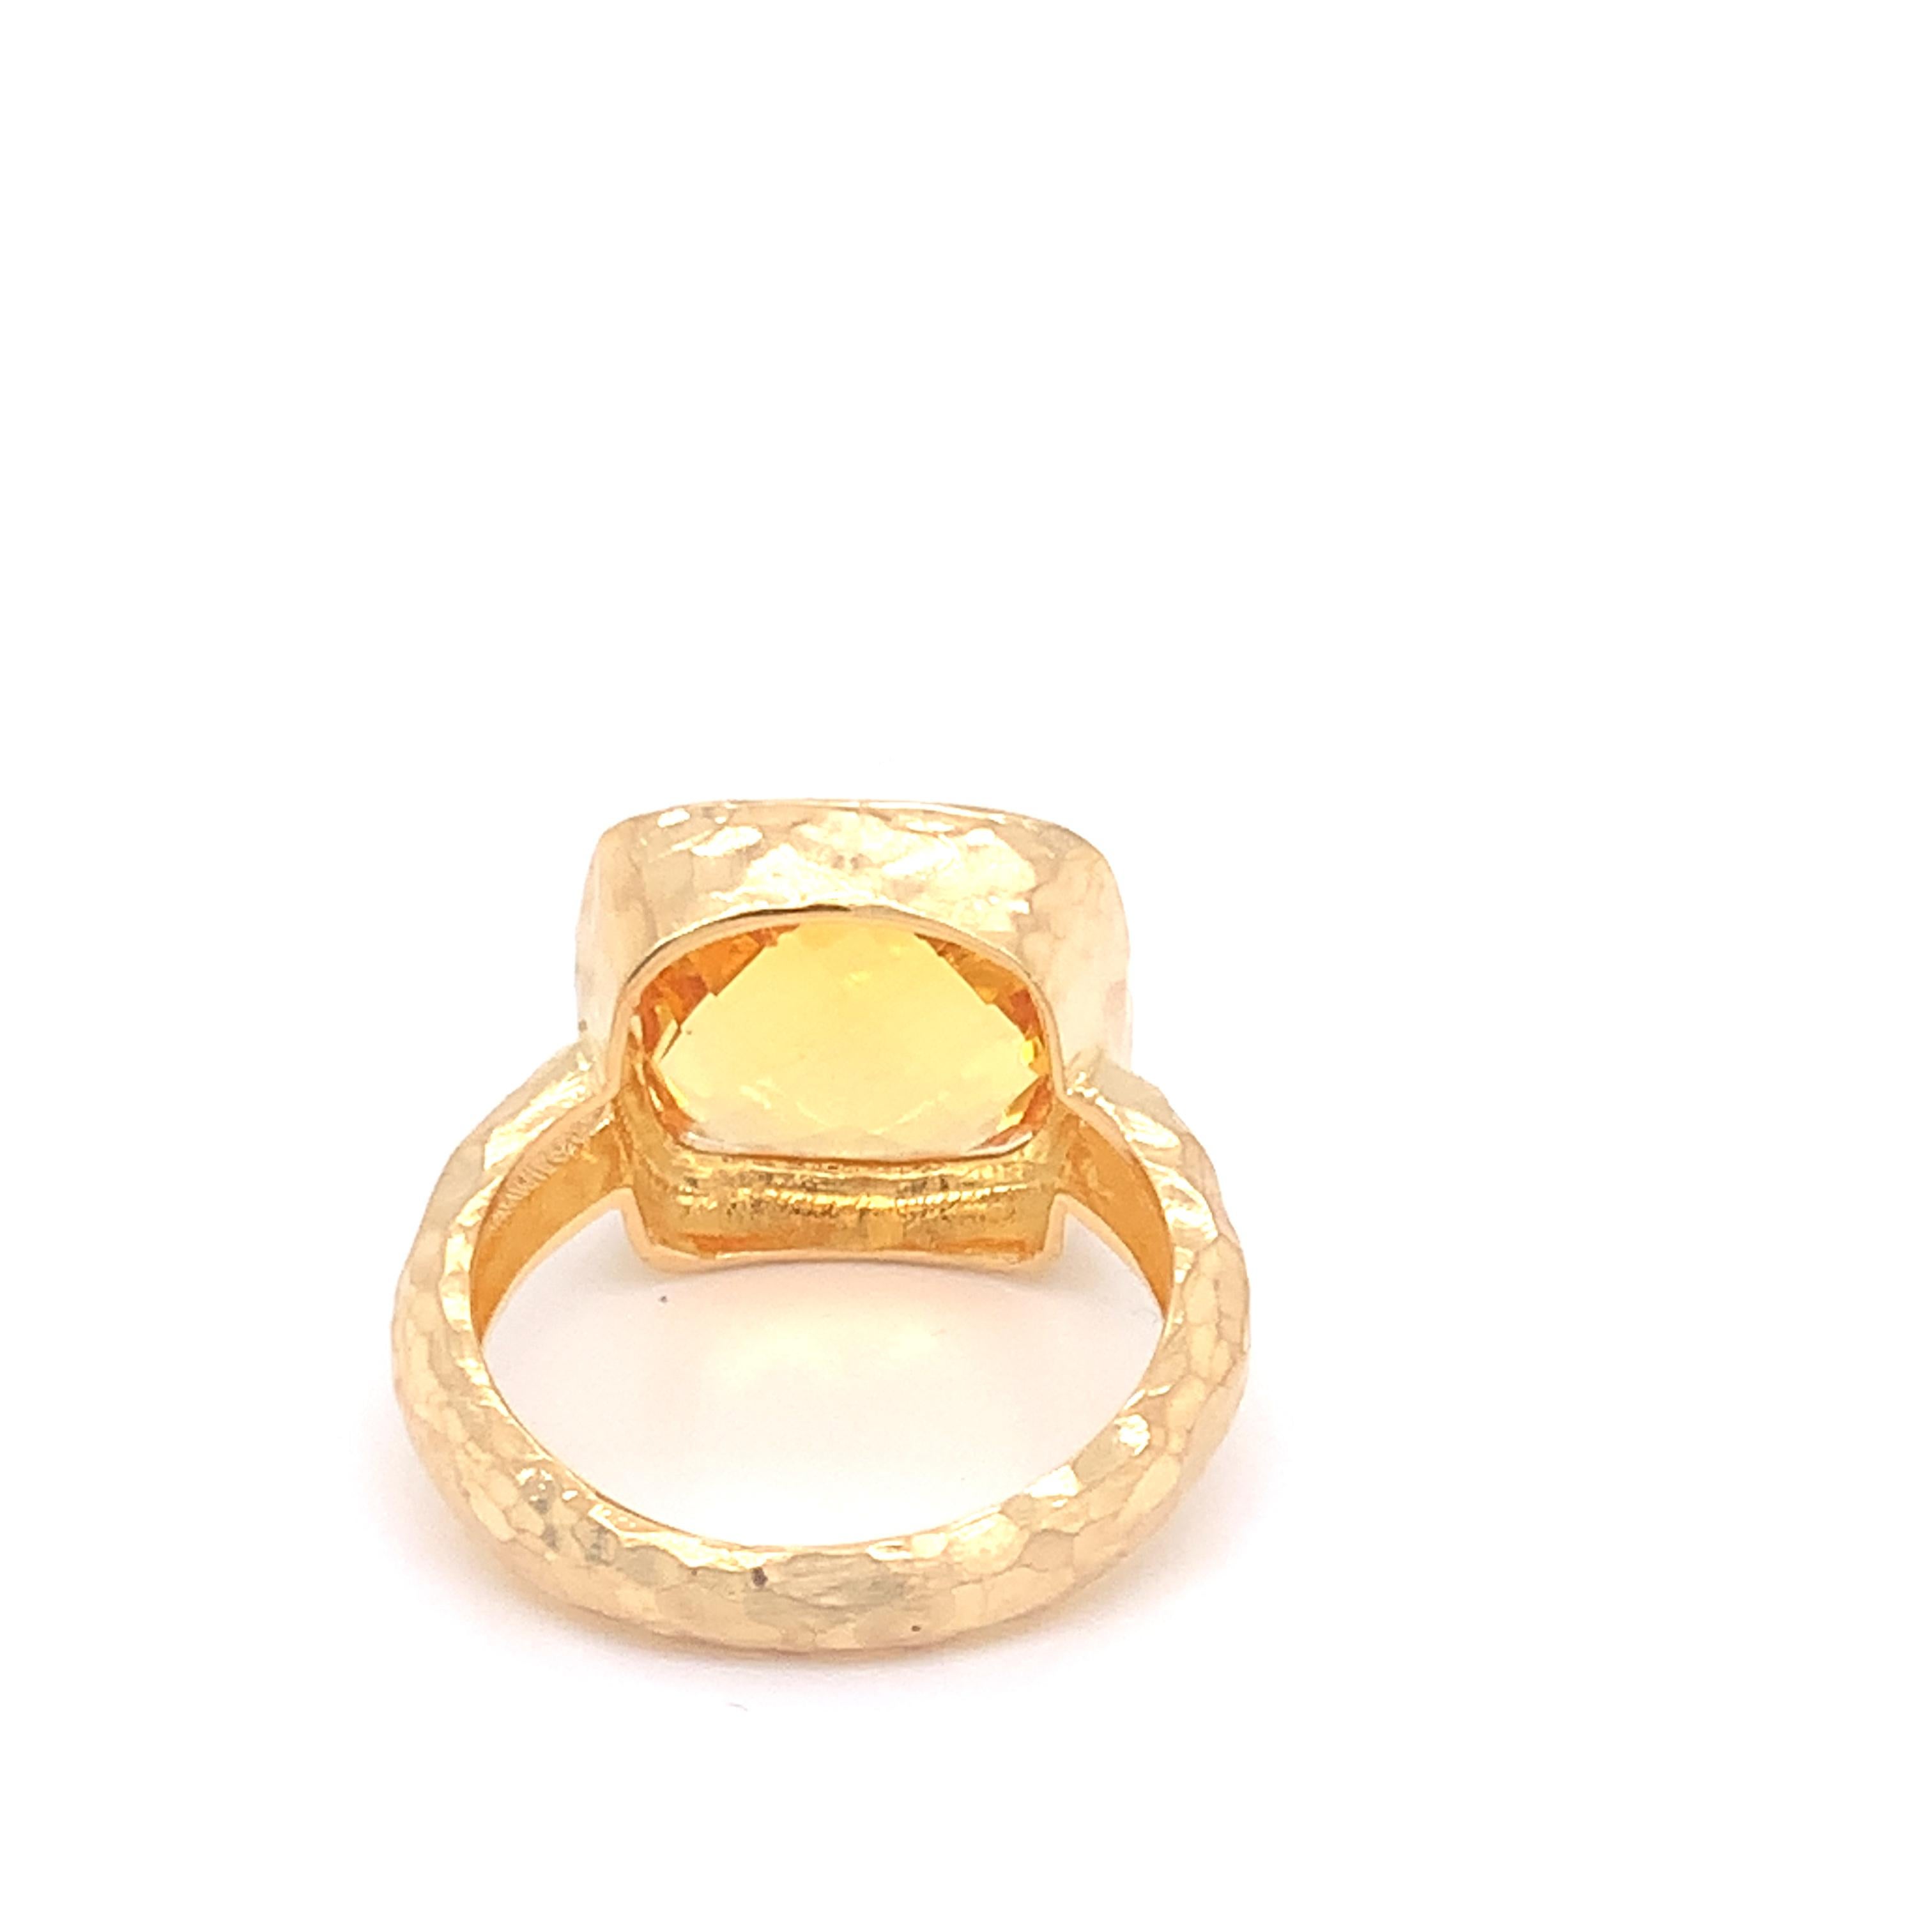 For Sale:  Hand-Crafted 14 Karat Yellow Gold Citrine Cocktail Ring 3